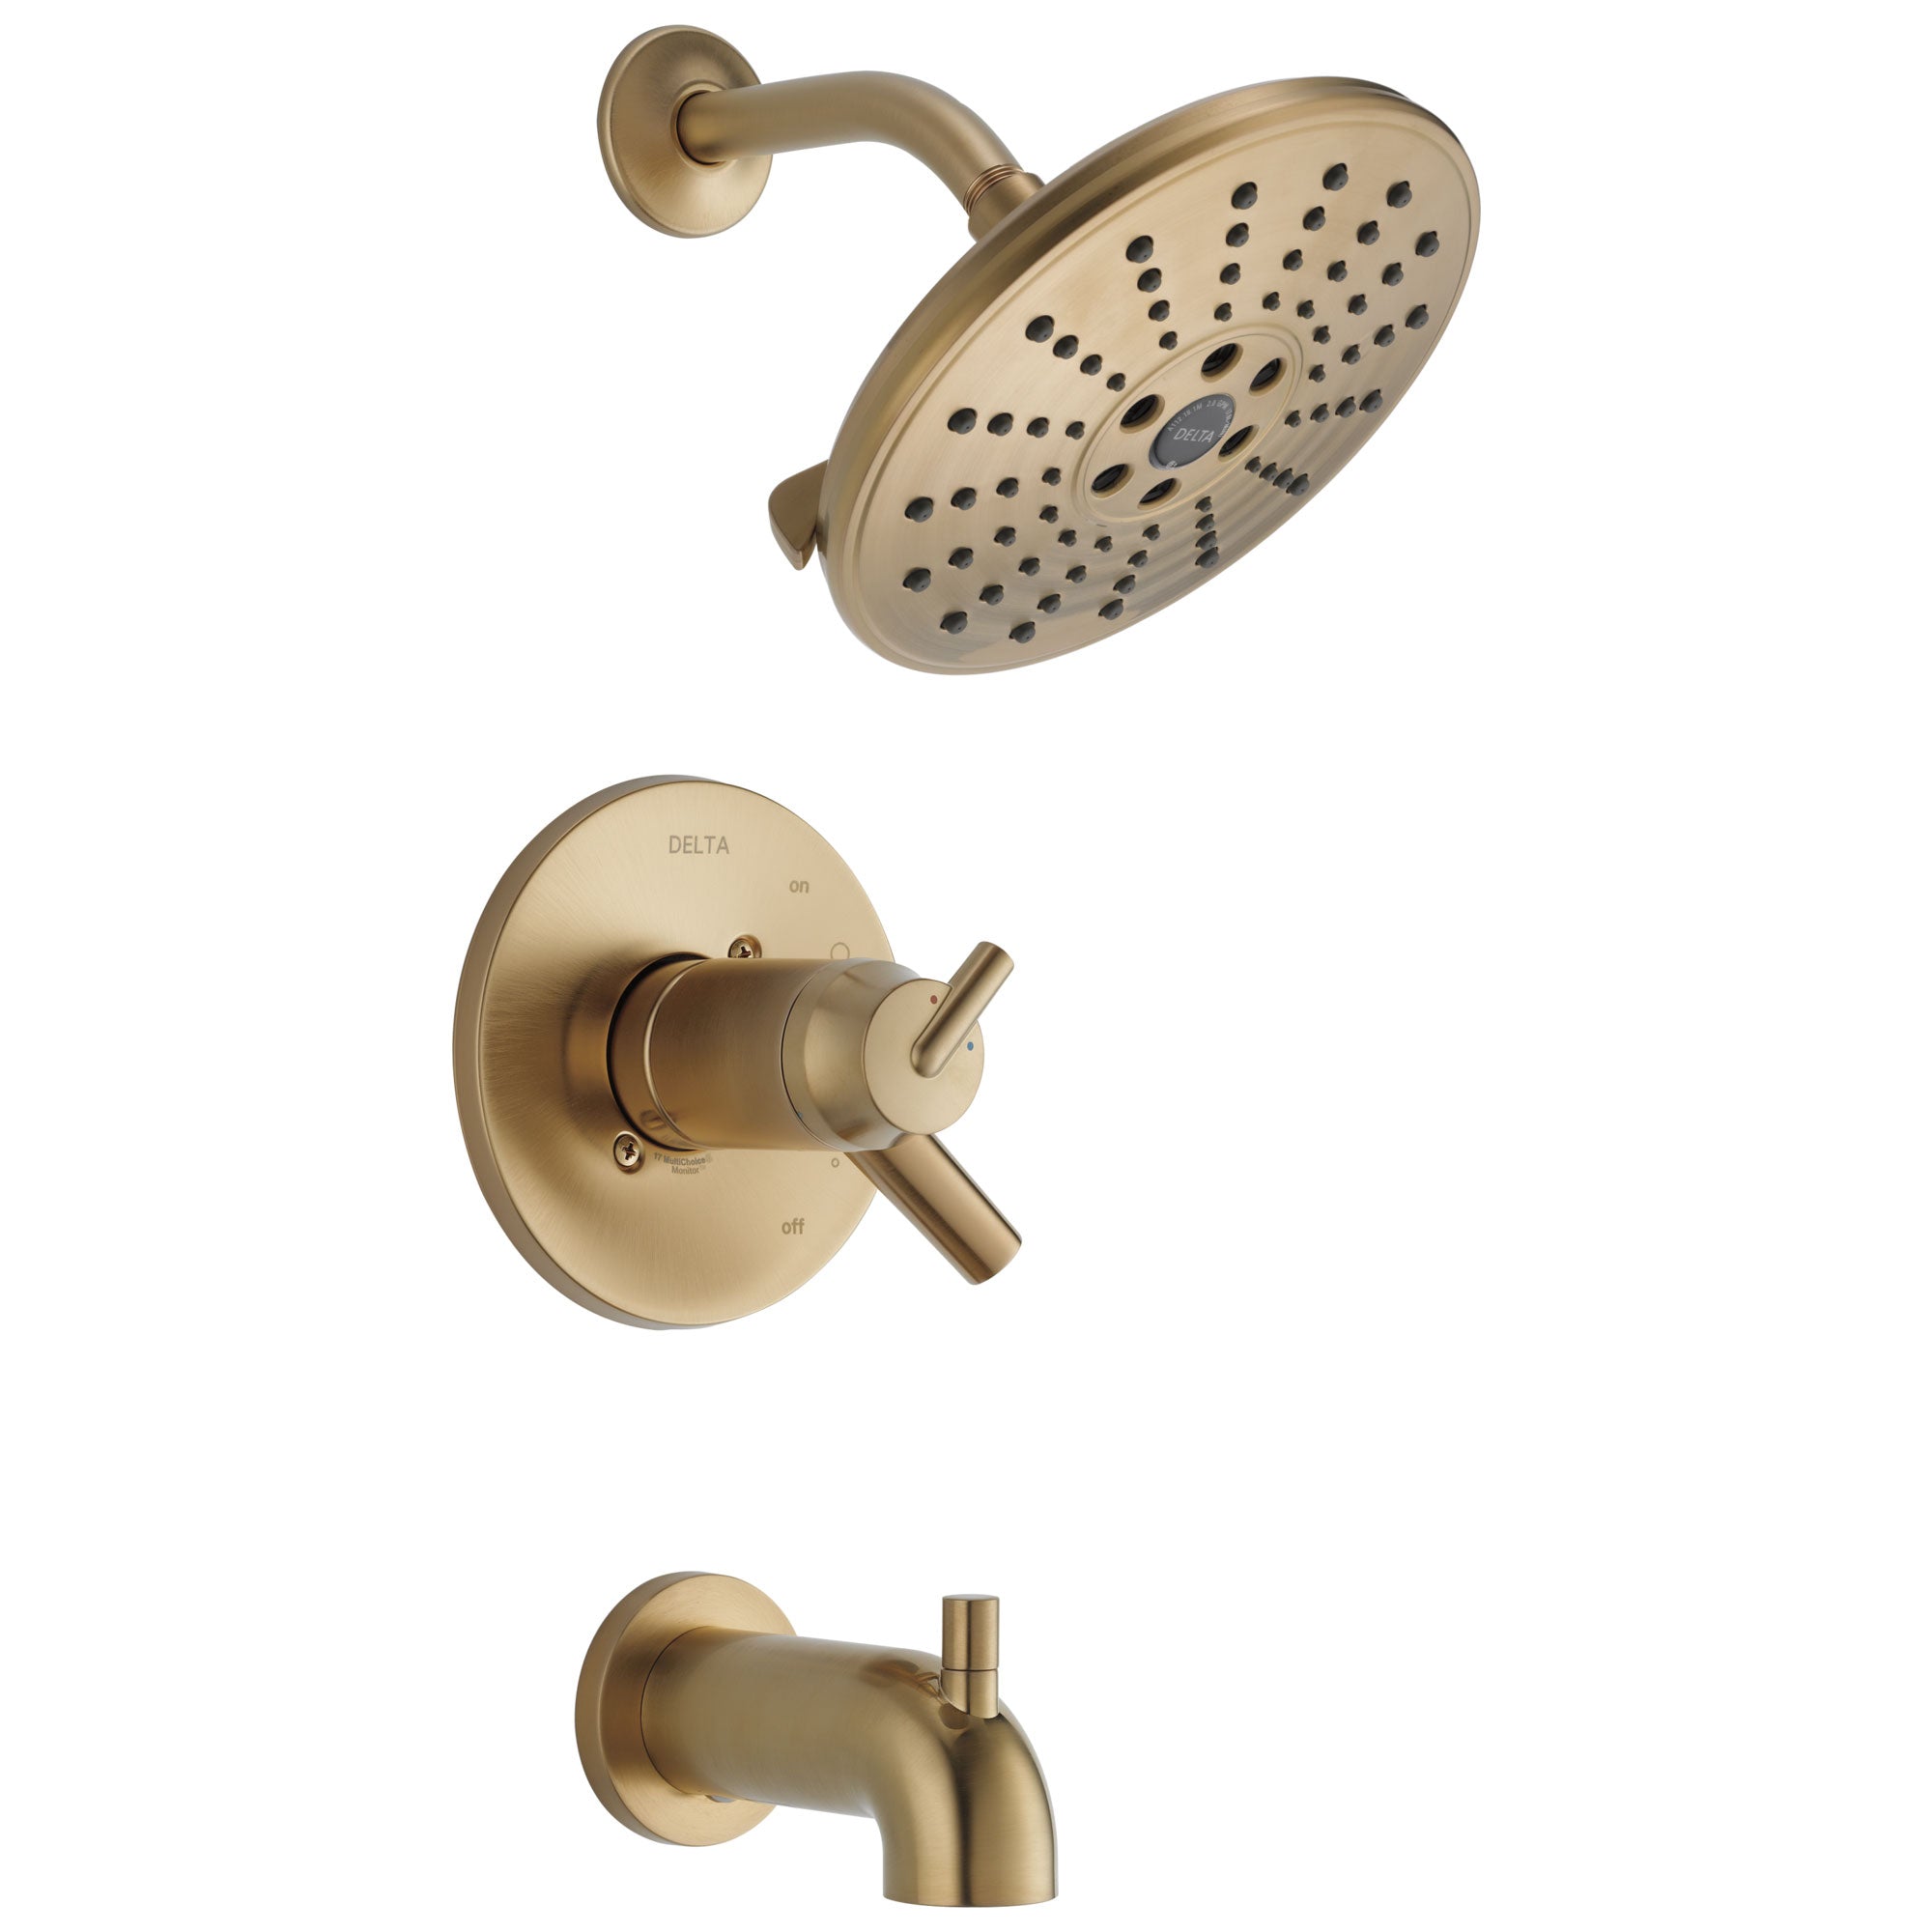 Delta Trinsic Collection Champagne Bronze TempAssure 17T Series Watersense Thermostatic Tub T Shower Combo Faucet Includes Valve without Stops D2235V